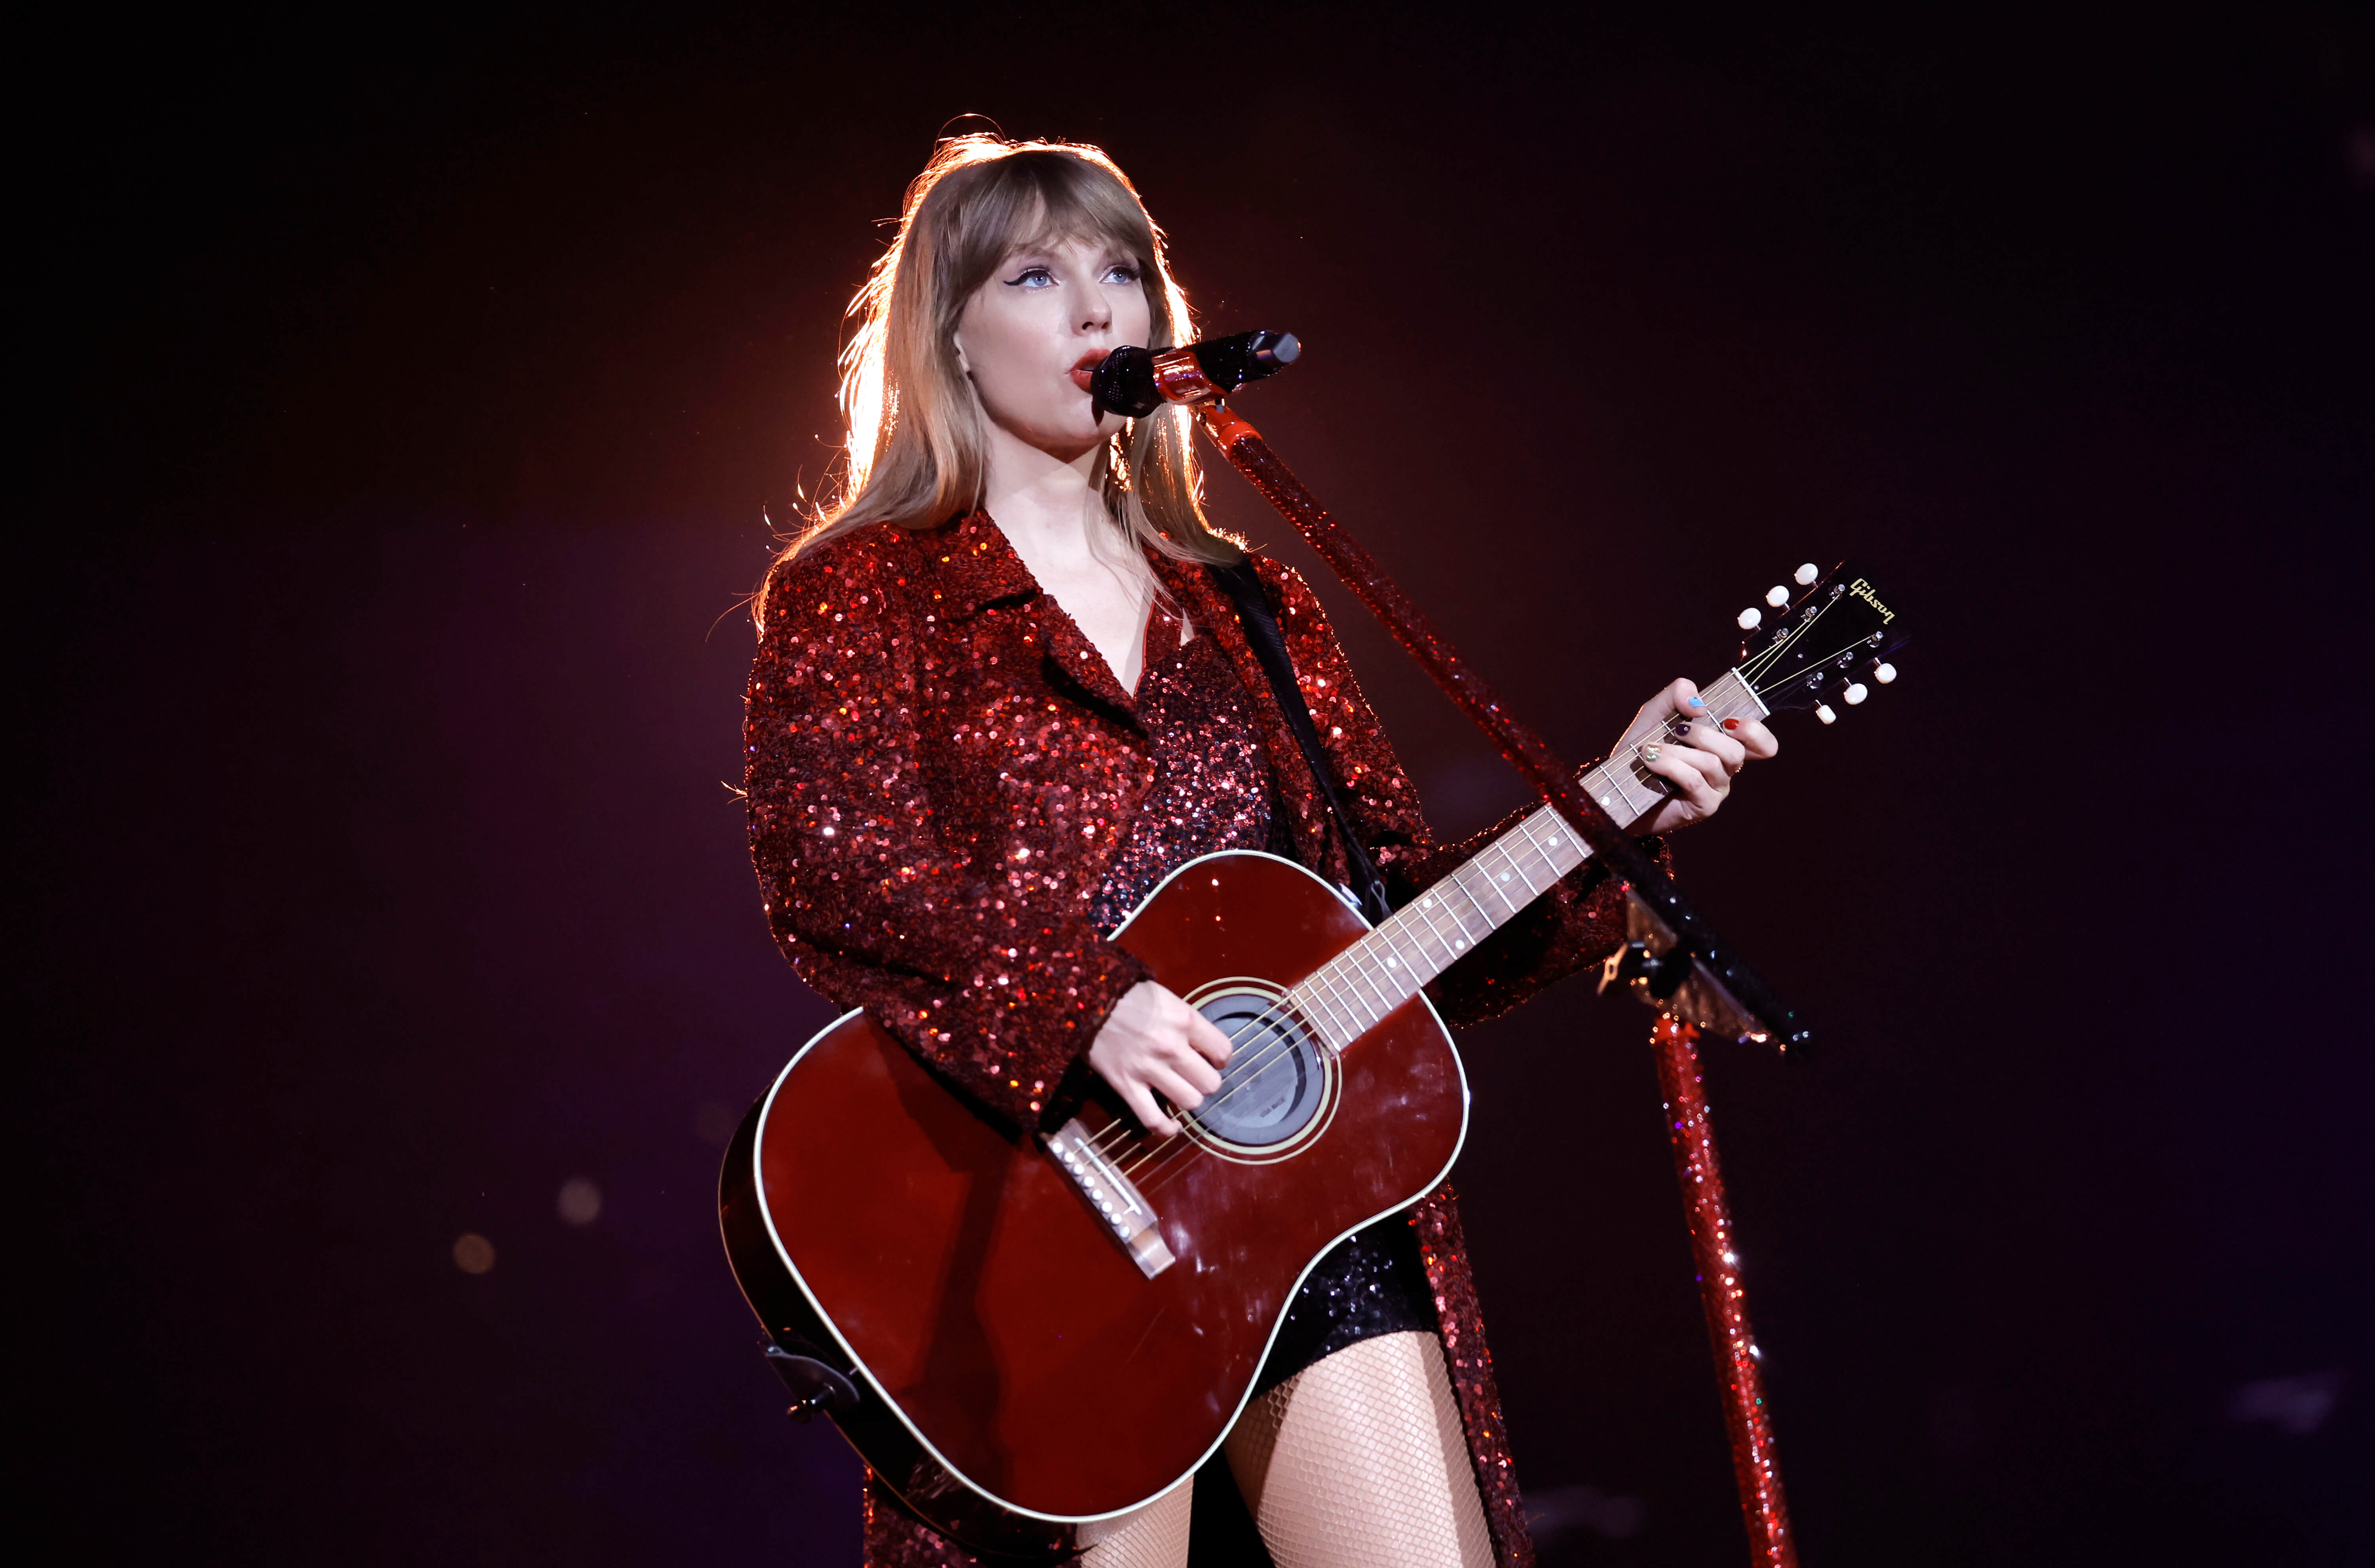 Taylor Swift playing guitar and singing into a microphone on stage.